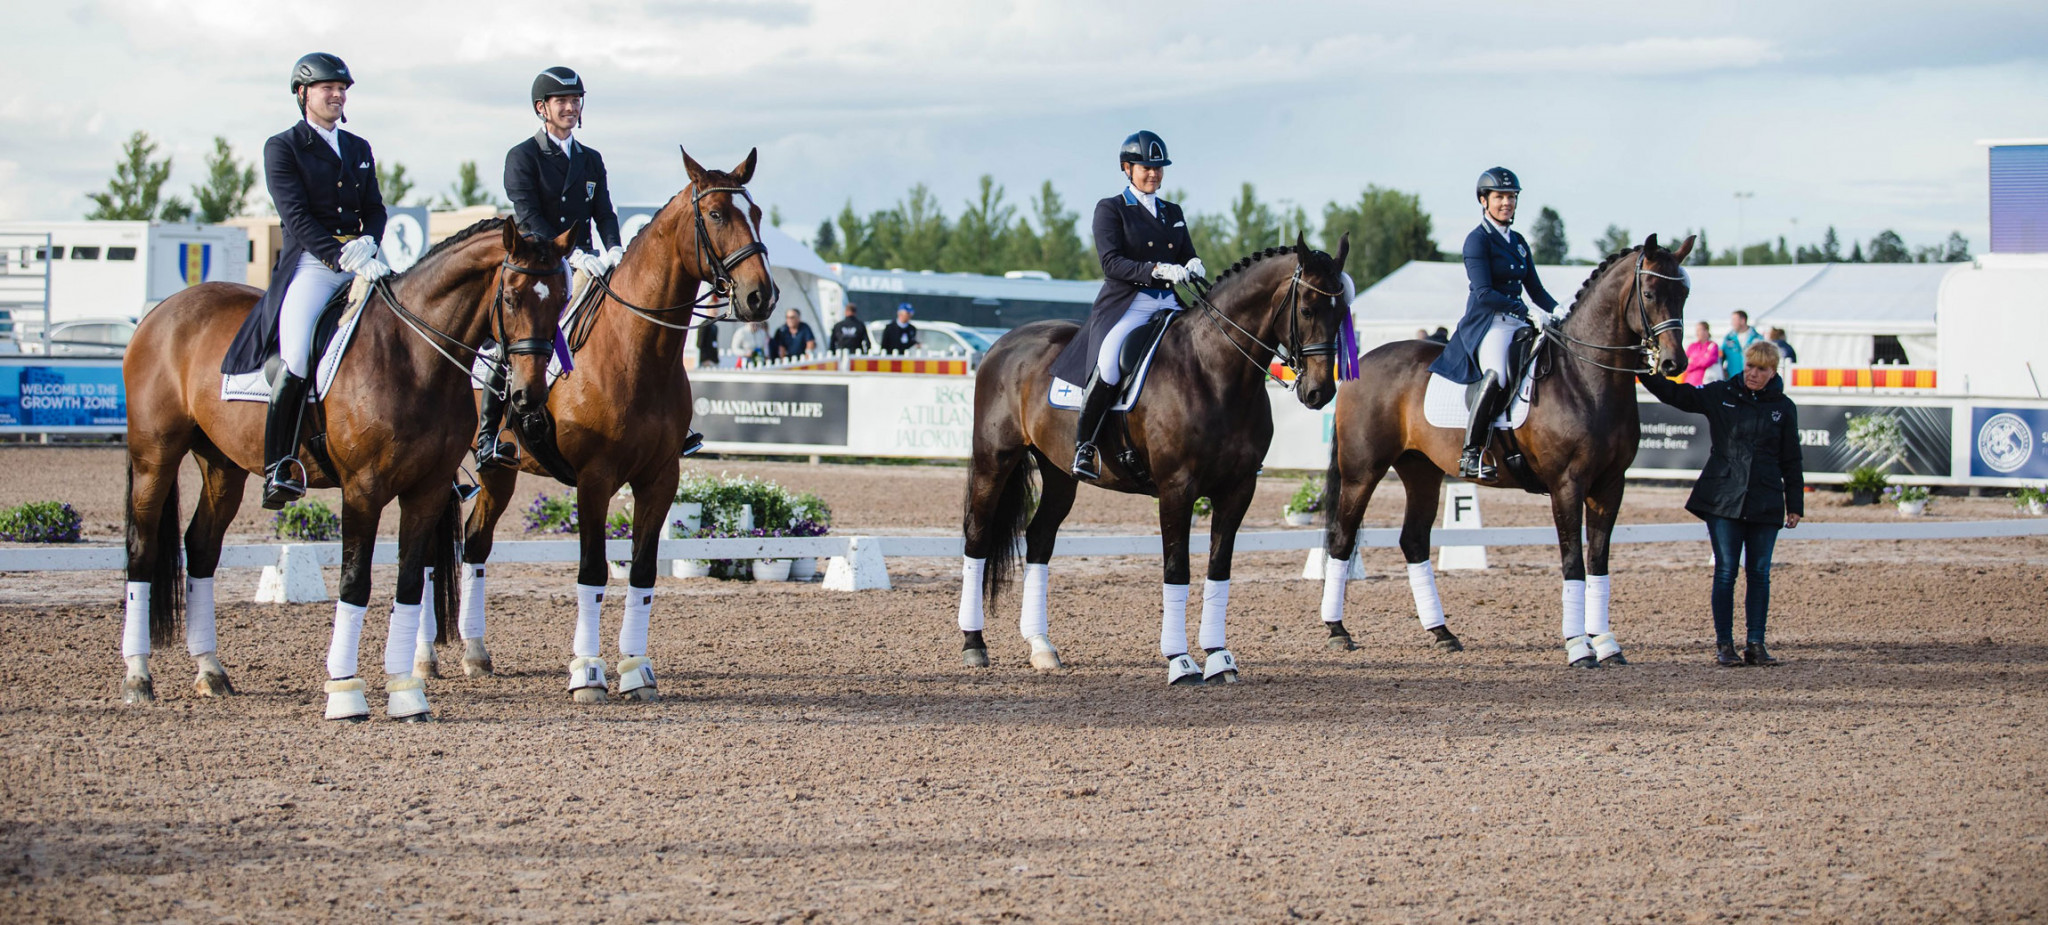 Sweden came out on top at the 2019 FEI Dressage Nations Cup event in Järvenpää ©FEI